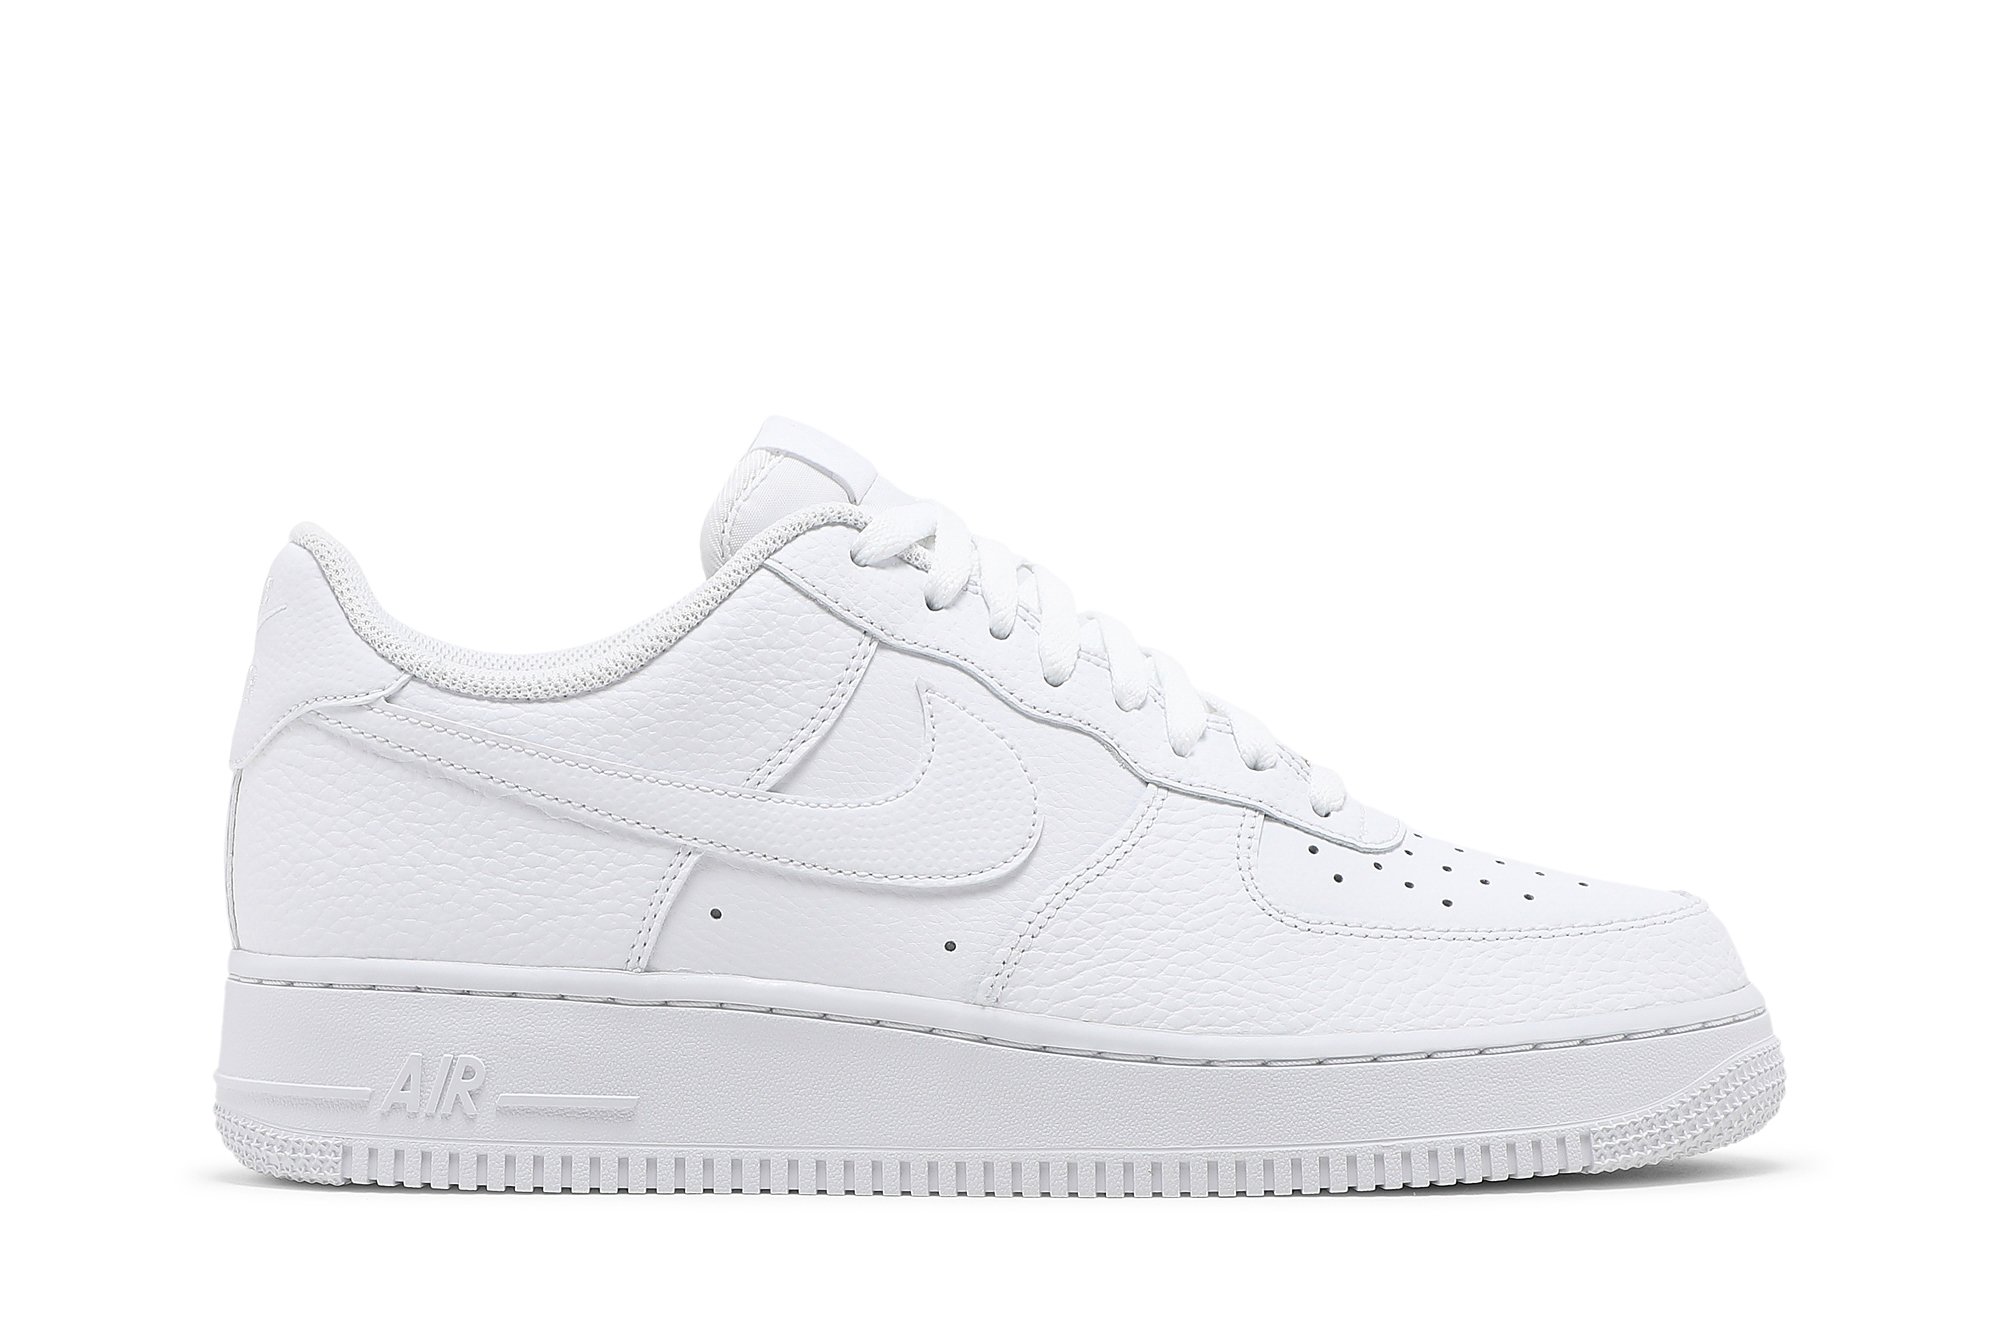 white and gold air force 1 men